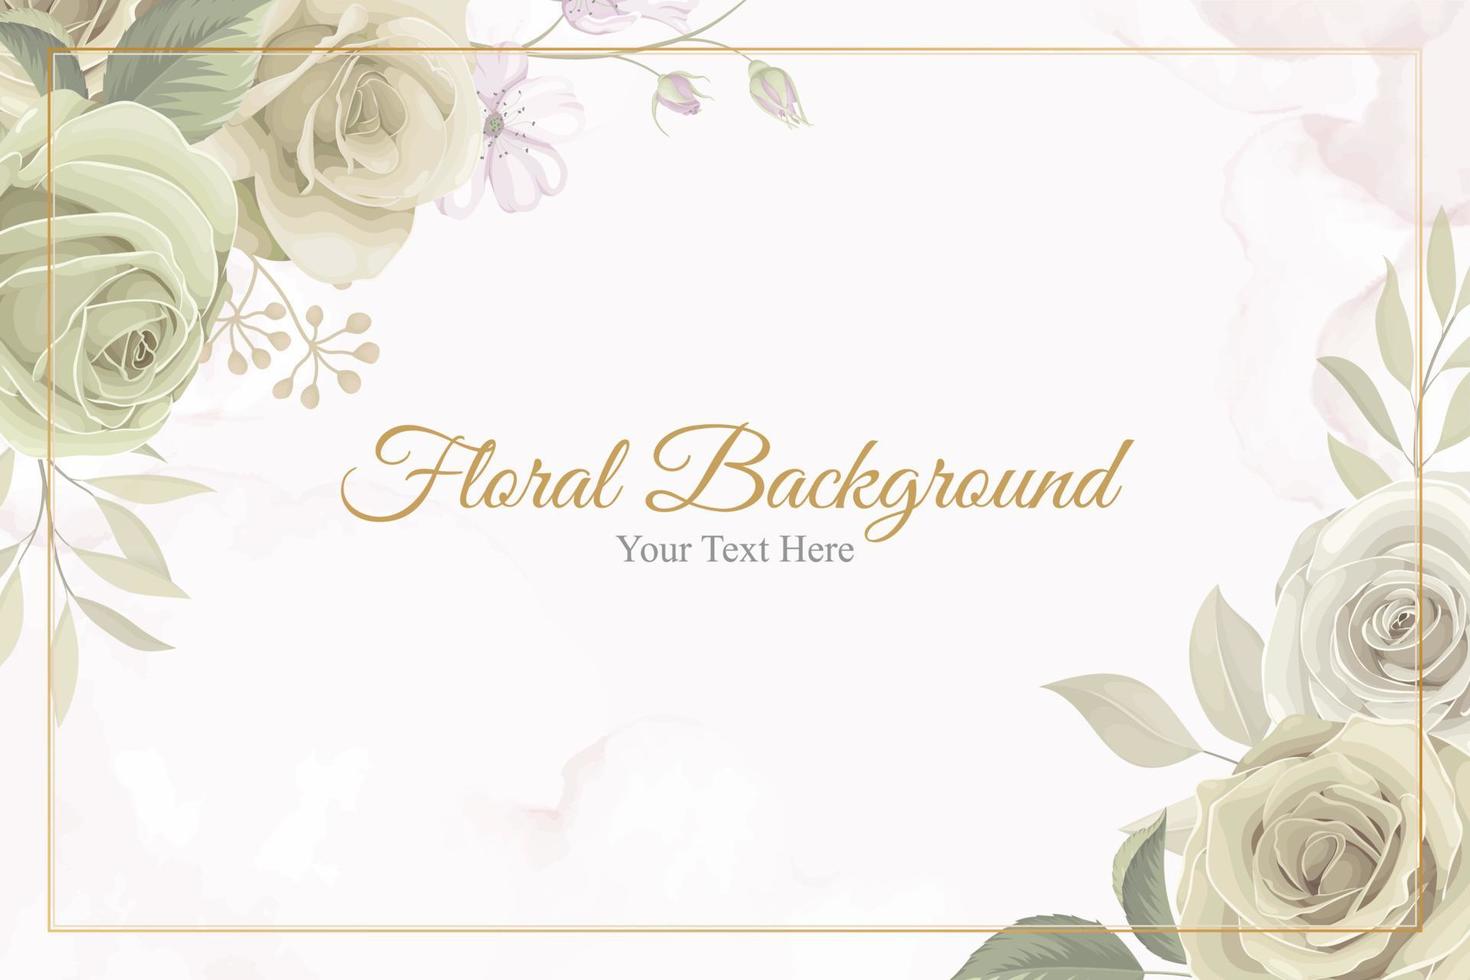 Beautiful flower background with soft colors vector